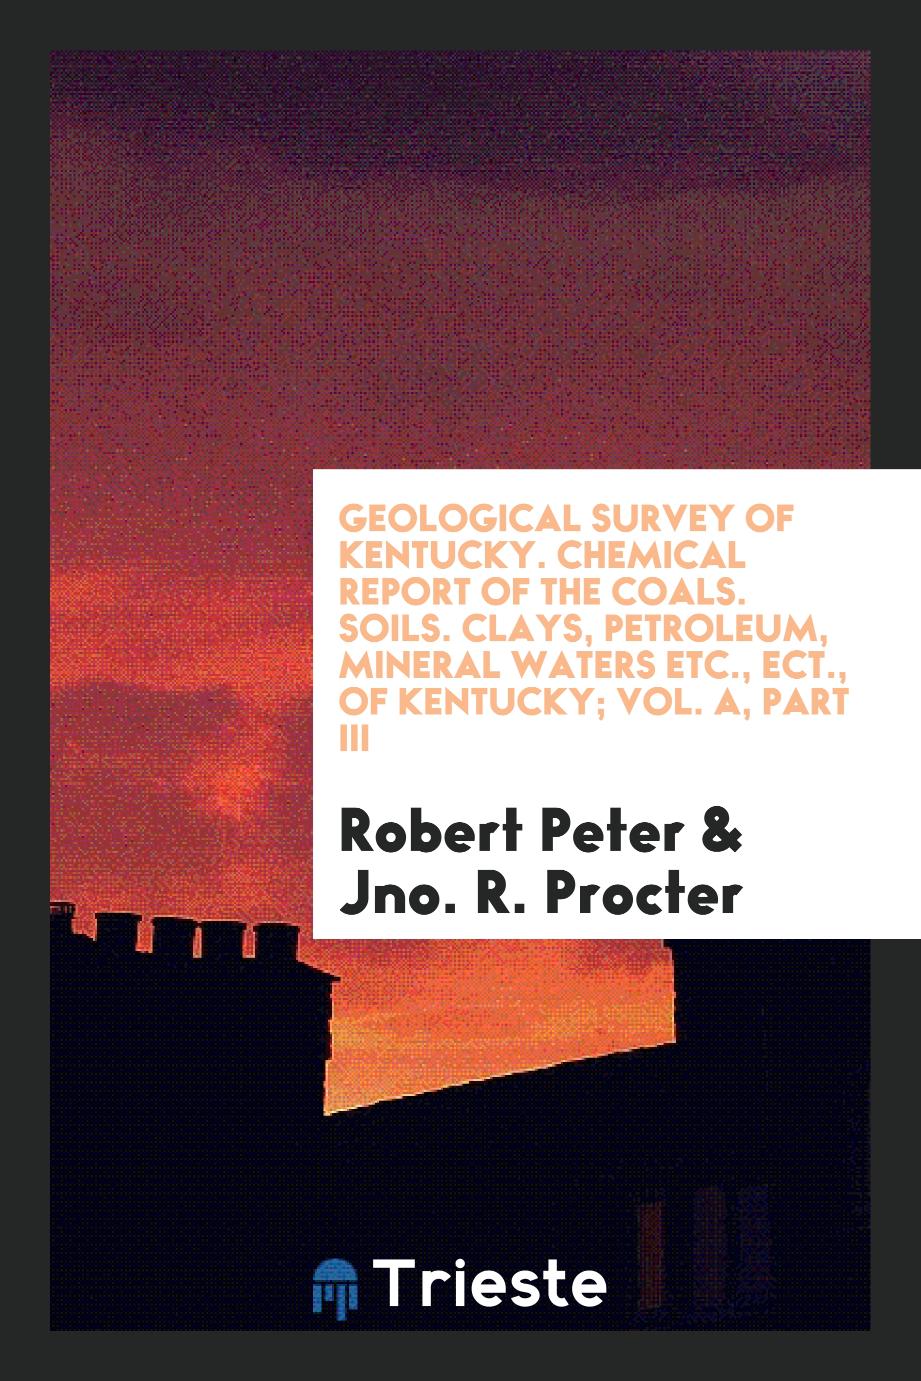 Geological Survey of Kentucky. Chemical Report of the Coals. Soils. Clays, Petroleum, Mineral Waters Etc., Ect., of Kentucky; Vol. A, Part III